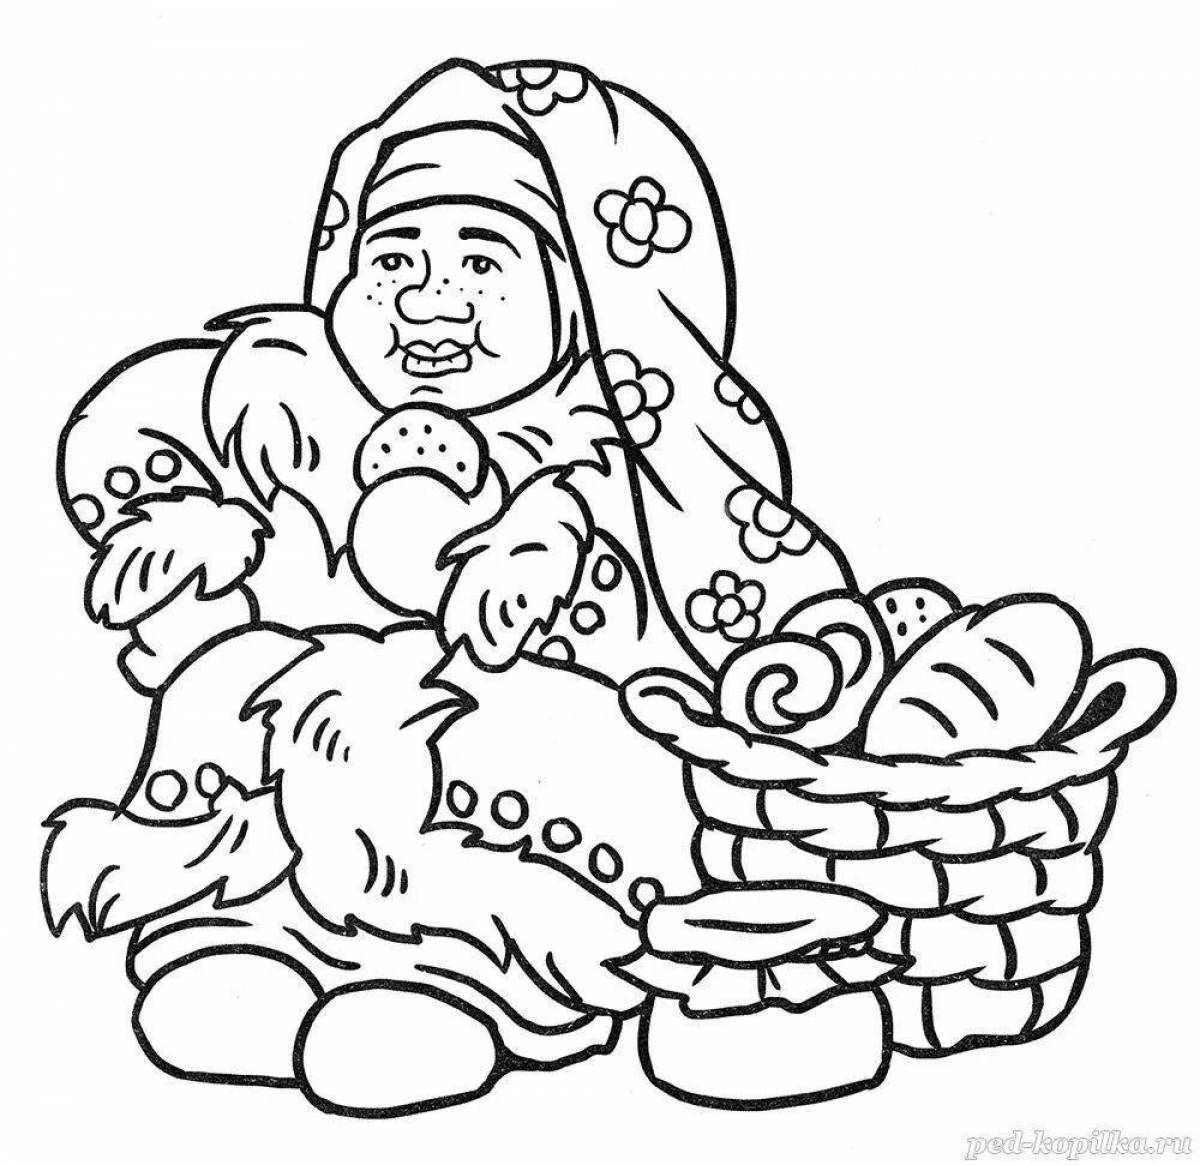 Sparkling Morozko coloring pages for kids